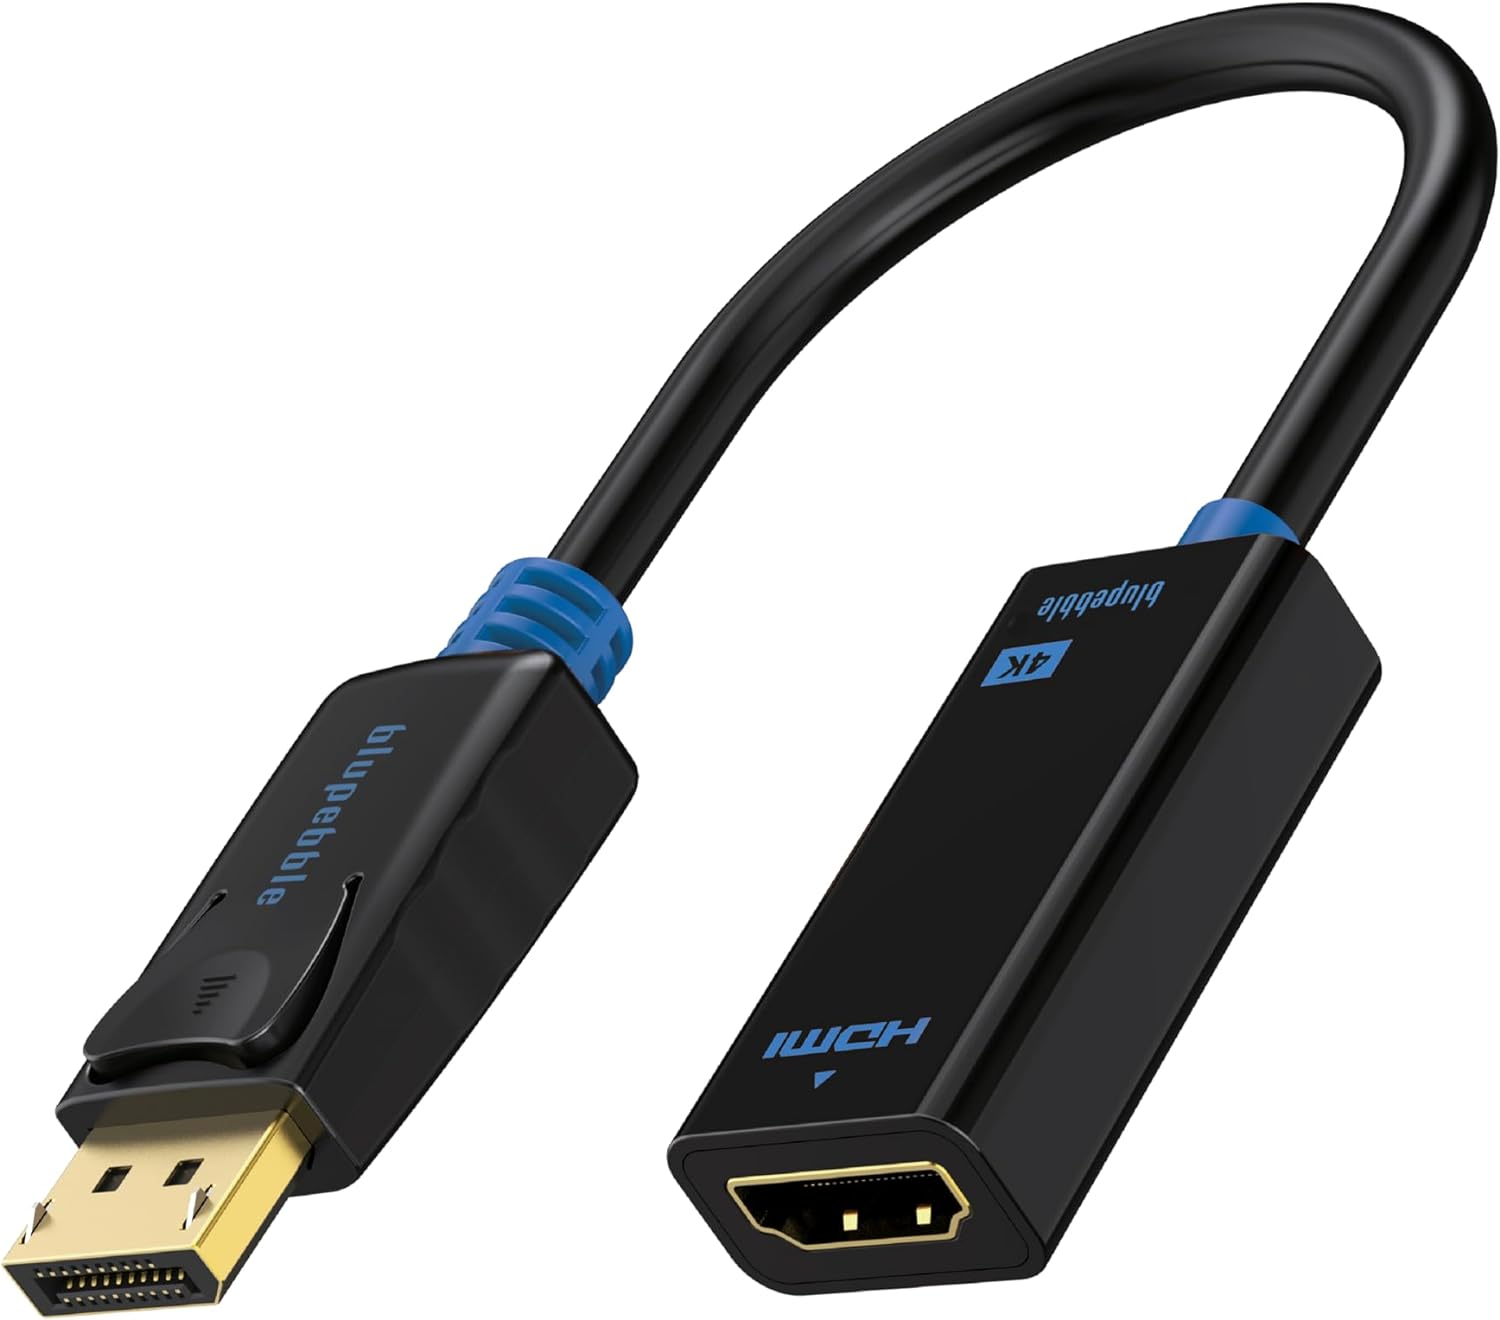 Blupebble 4K DisplayPort to HDMI Adapter 4k@30 Hz DP to HDMI Converter Male to Female Compatible with HP, ThinkPad, AMD, NVIDIA, Desktop, and More